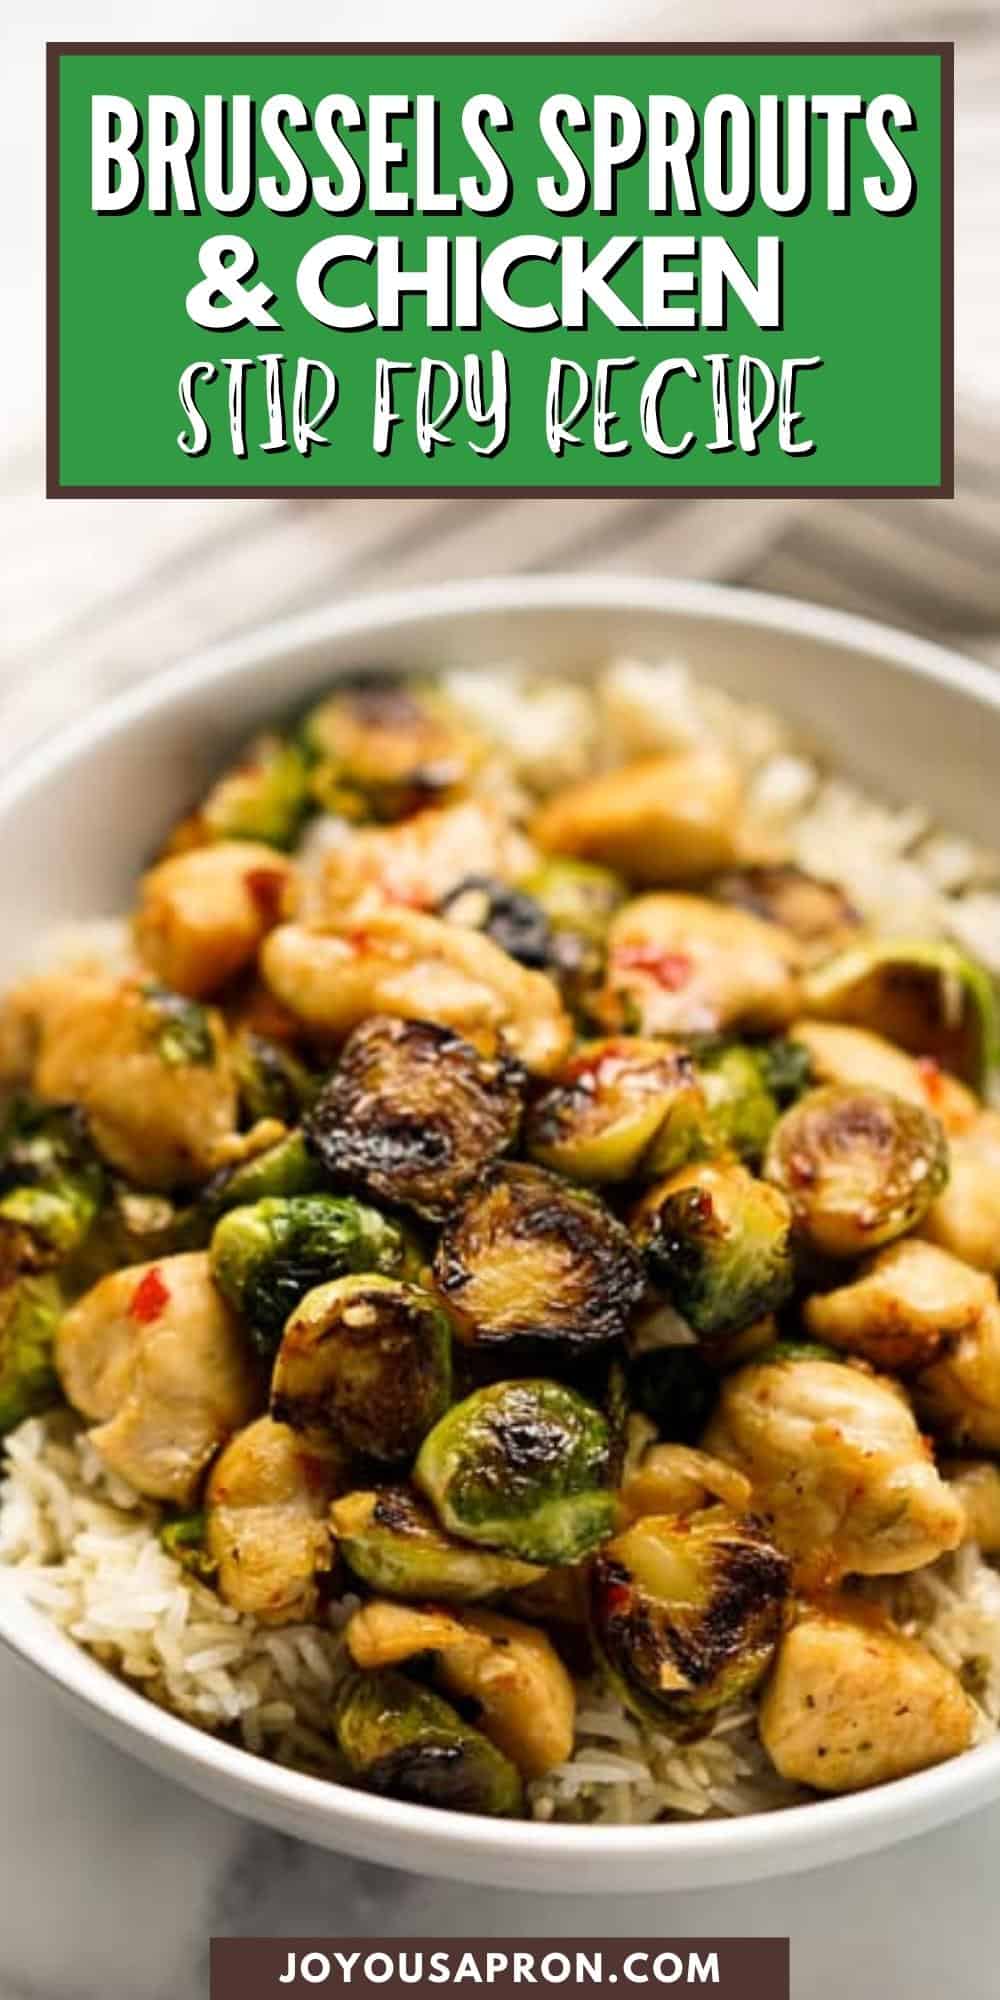 Brussels Sprouts and Chicken - Asian-inspired stir fry dish that is healthy and easy to make. Flavorful and filled with great textures, this dish combines crunchy Brussels with juicy chicken with sweet chili sauce and fish sauce. via @joyousapron